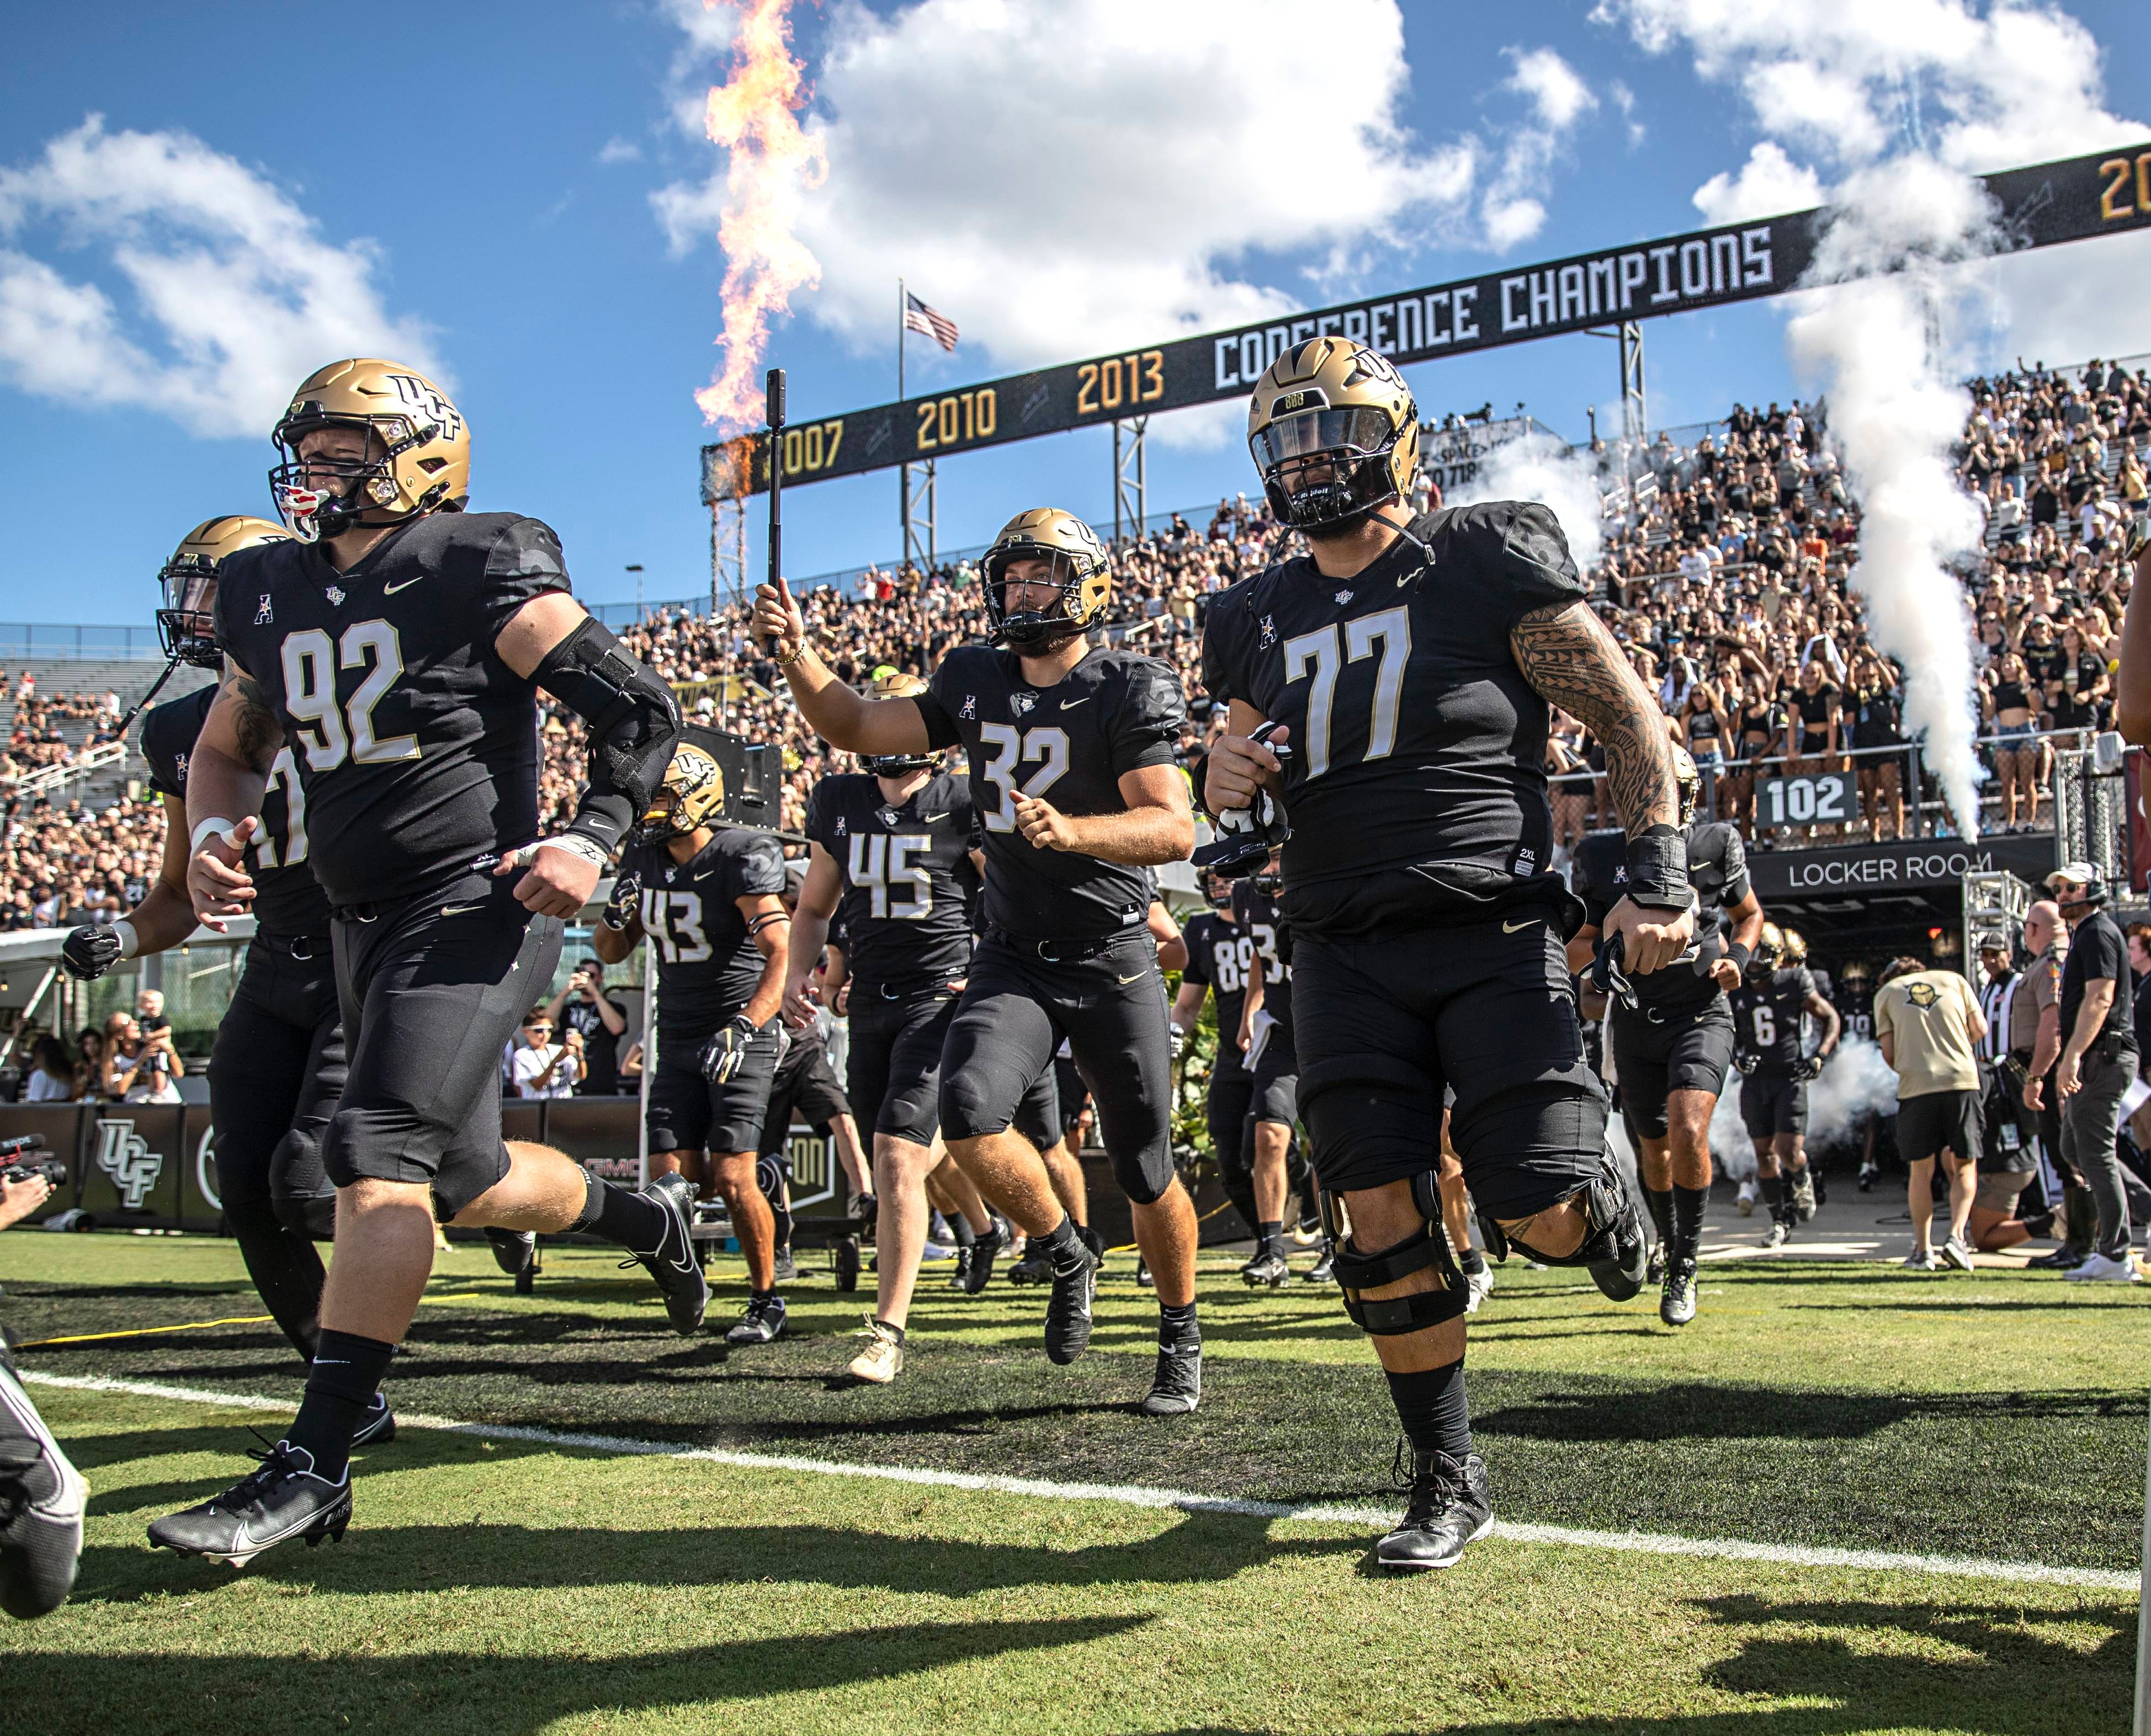 2 Changes Made to UCF's Depth Chart